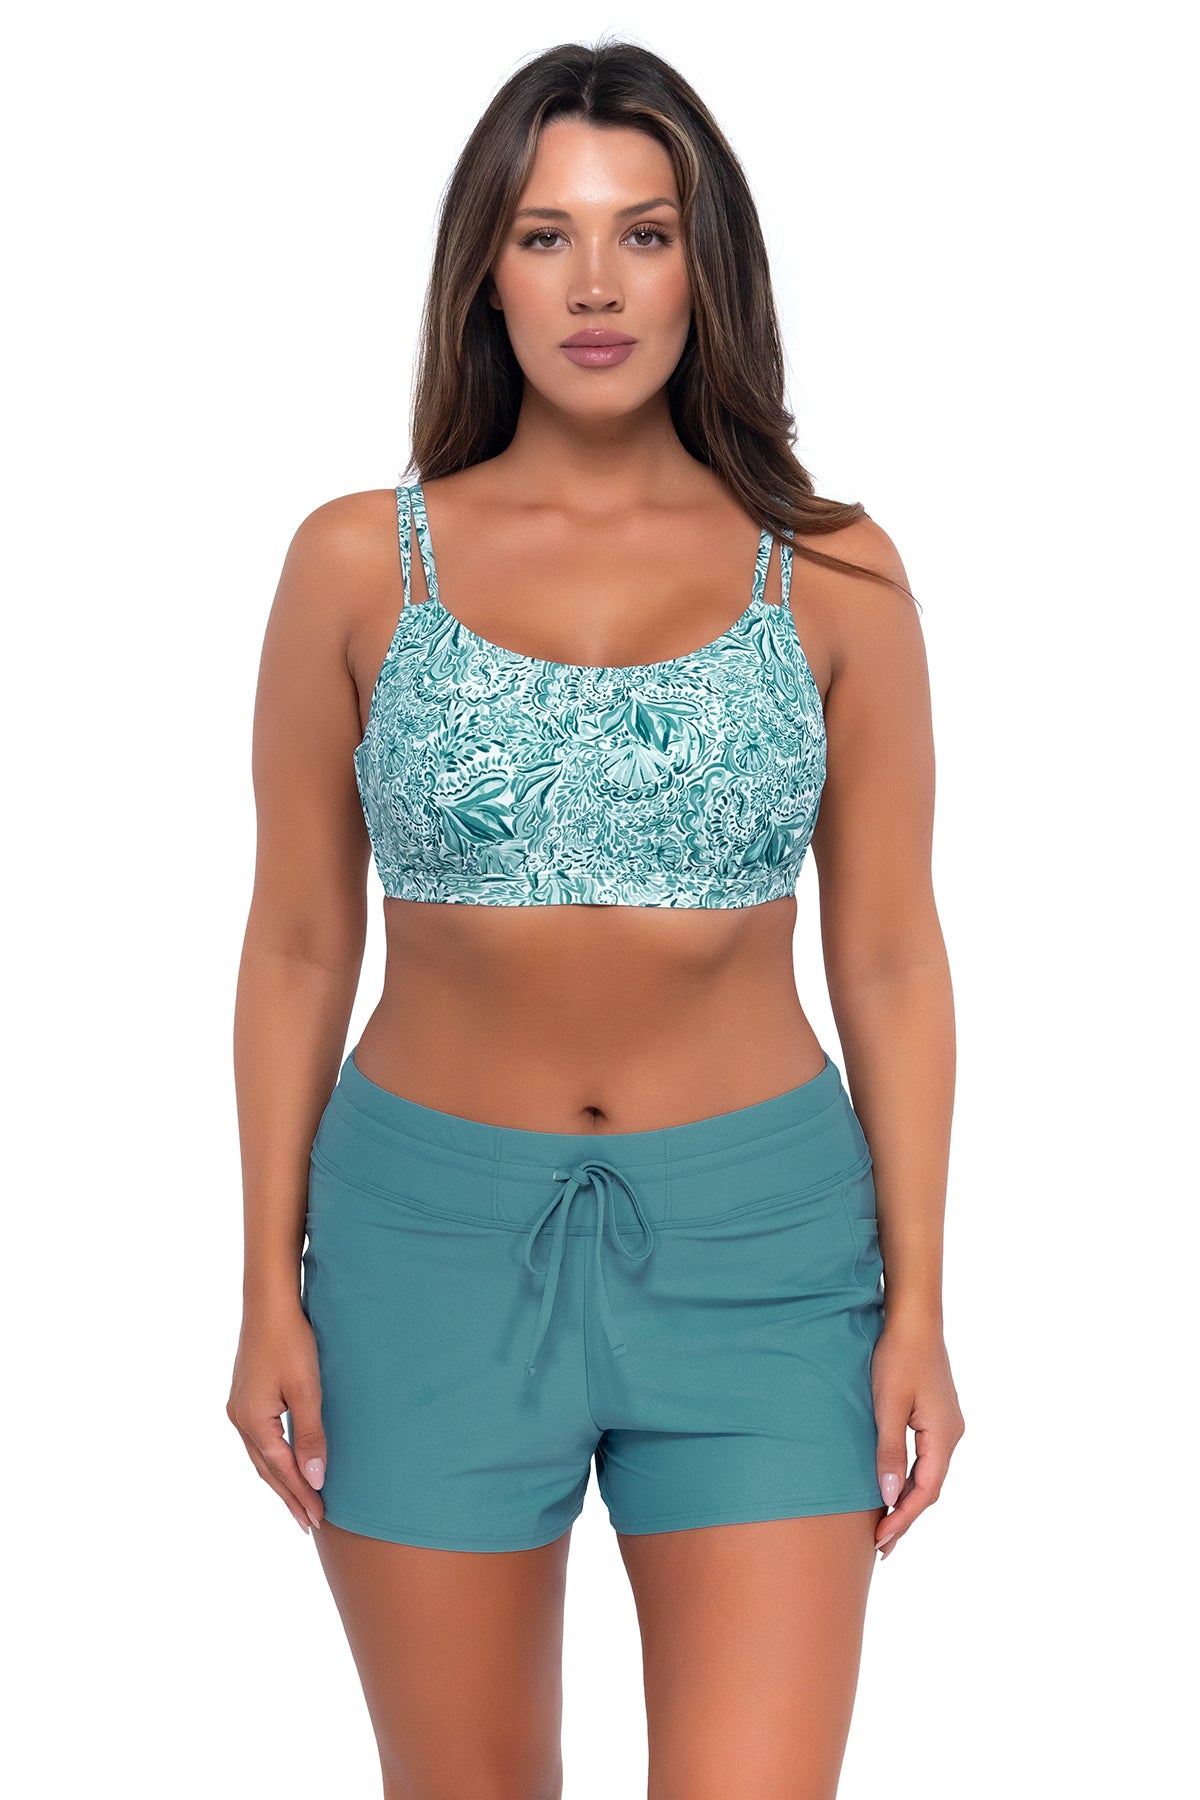 Front pose #1 of Nicky wearing Sunsets By the Sea Taylor Bralette Top paired with Laguna Swim Short women's casual wear